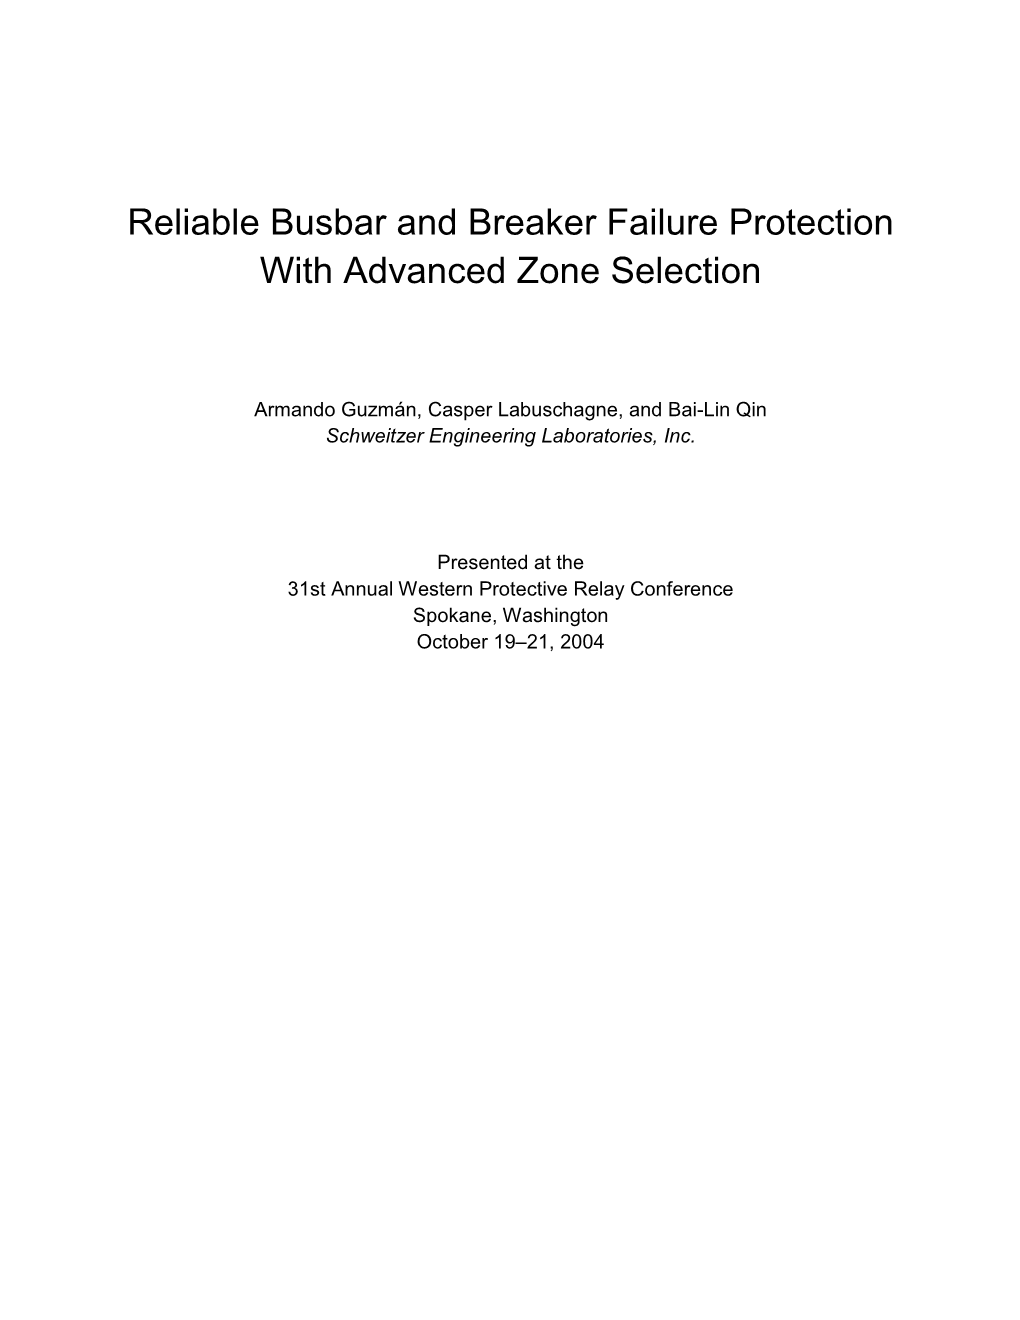 Reliable Busbar and Breaker Failure Protection with Advanced Zone Selection